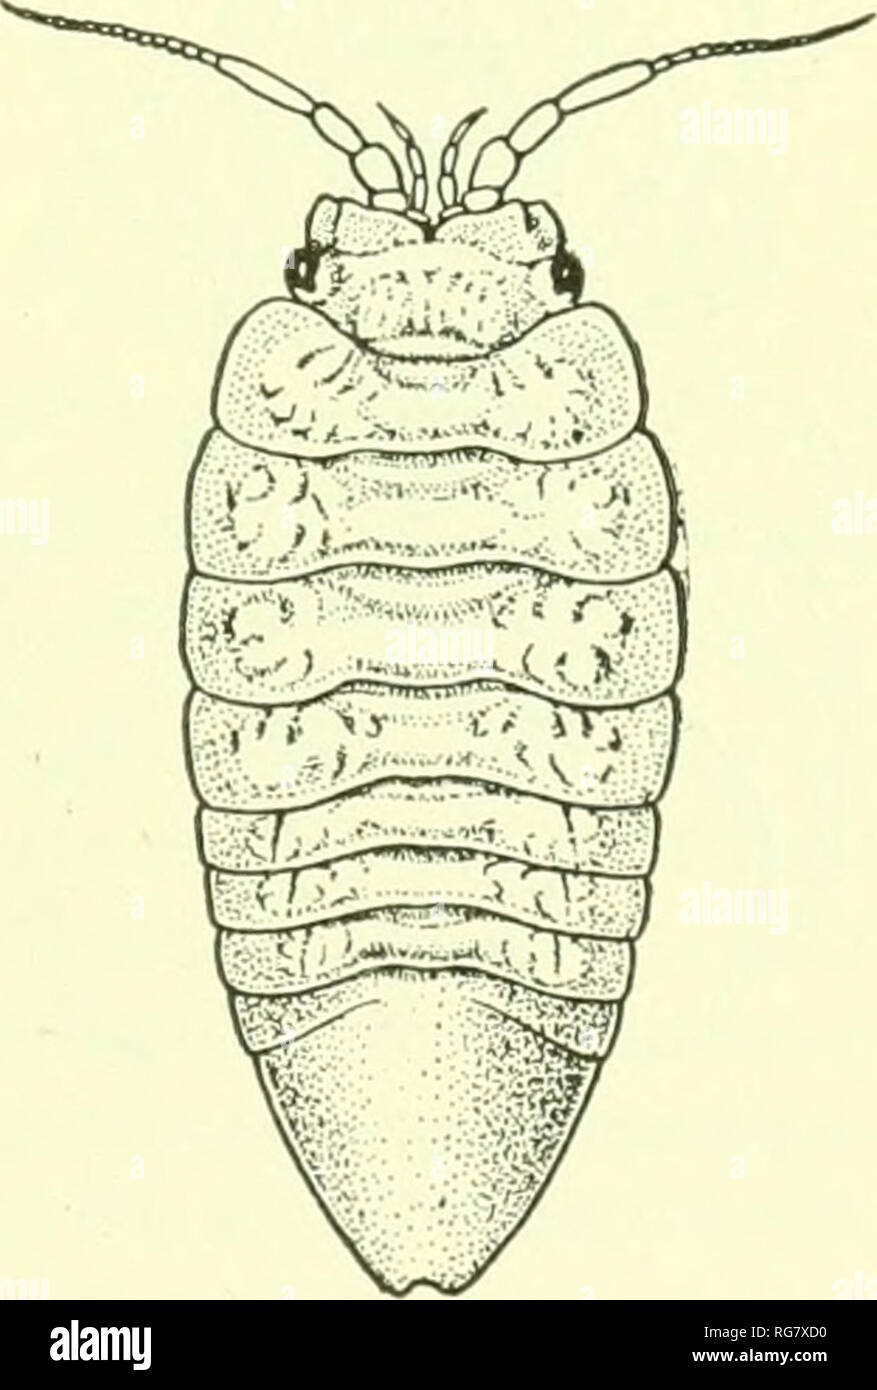 . Bulletin - United States National Museum. Science. ISOPODS OE^ NORTH AMERICA. 885 three. The epinioni of all the .seg-ments are consolidated with the segments. The lateral margins are almost straight and continuous. The abdomen is composed of one segment, with lateral sutures at the base, indicating another partly coalesced segment; it tapers to a narrow extremity, the apex of which is emarginate. The legs are more or less alike in structure. SYNIDOTEA BICUSPIDA (Owen). Idotea hicuspida Owen, Crnstacea of the Blossom, 1839, p. 92, pi. xxvii, fig. 6. Idotea pidchra Lockington, Proc. Cal. Acad Stock Photo